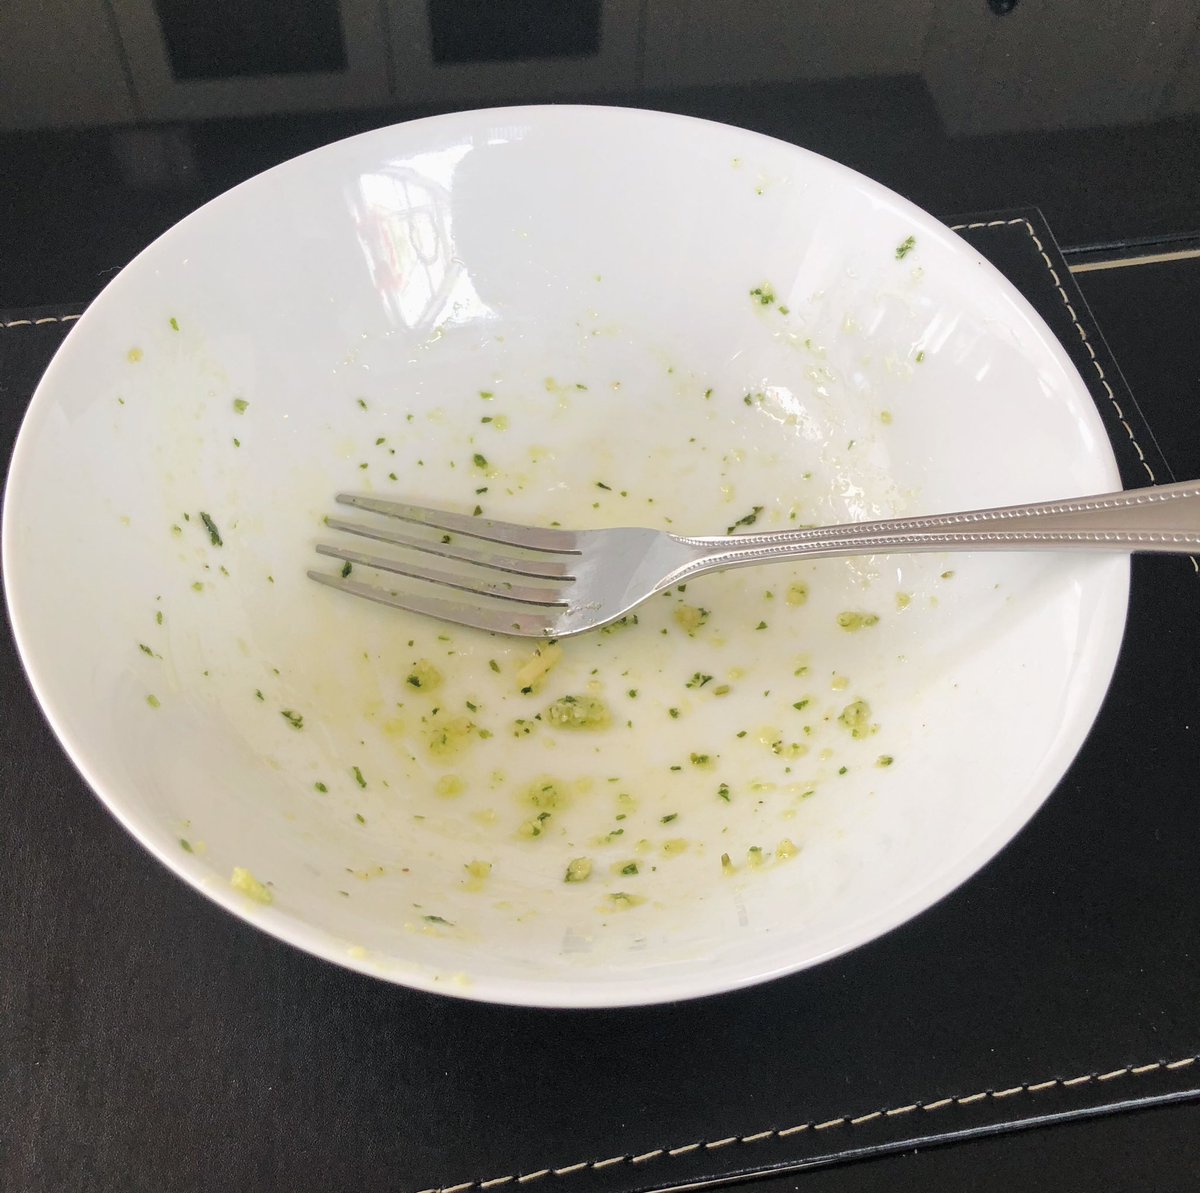 8 weeks since symptoms first started - today was a big step. I made my first meal from scratch in the last two months. A scrabbly pesto w/ spaghetti that was so, so delicious. Just pesto done in a food processor + cooking pasta but I’m very proud of myself. Full body proud pic!